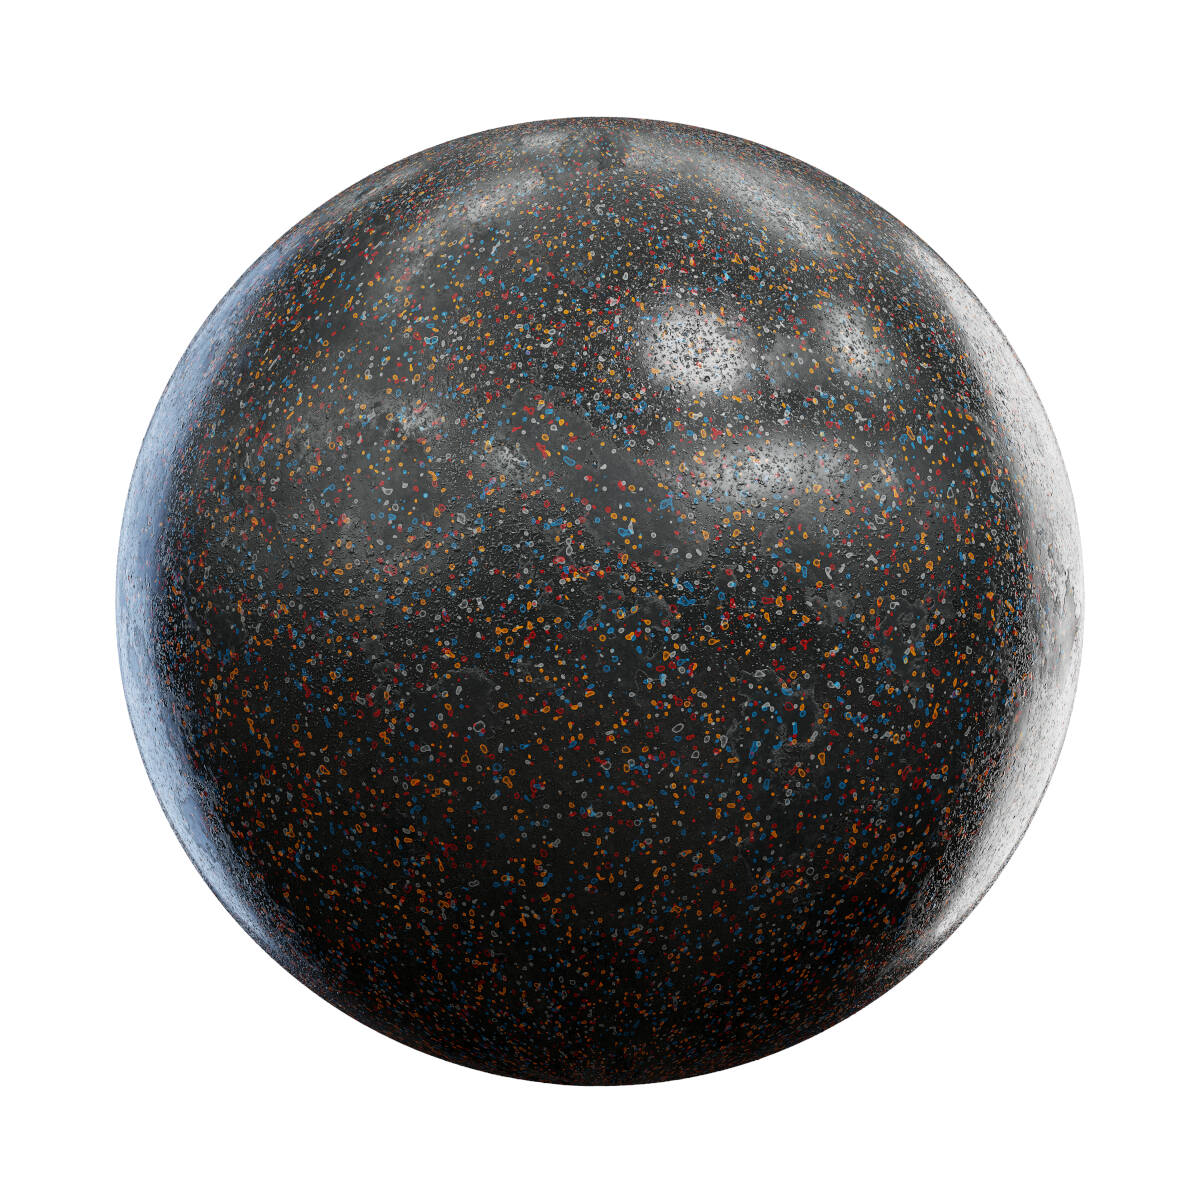 Dirty and Frekled Black Plastic PBR Texture